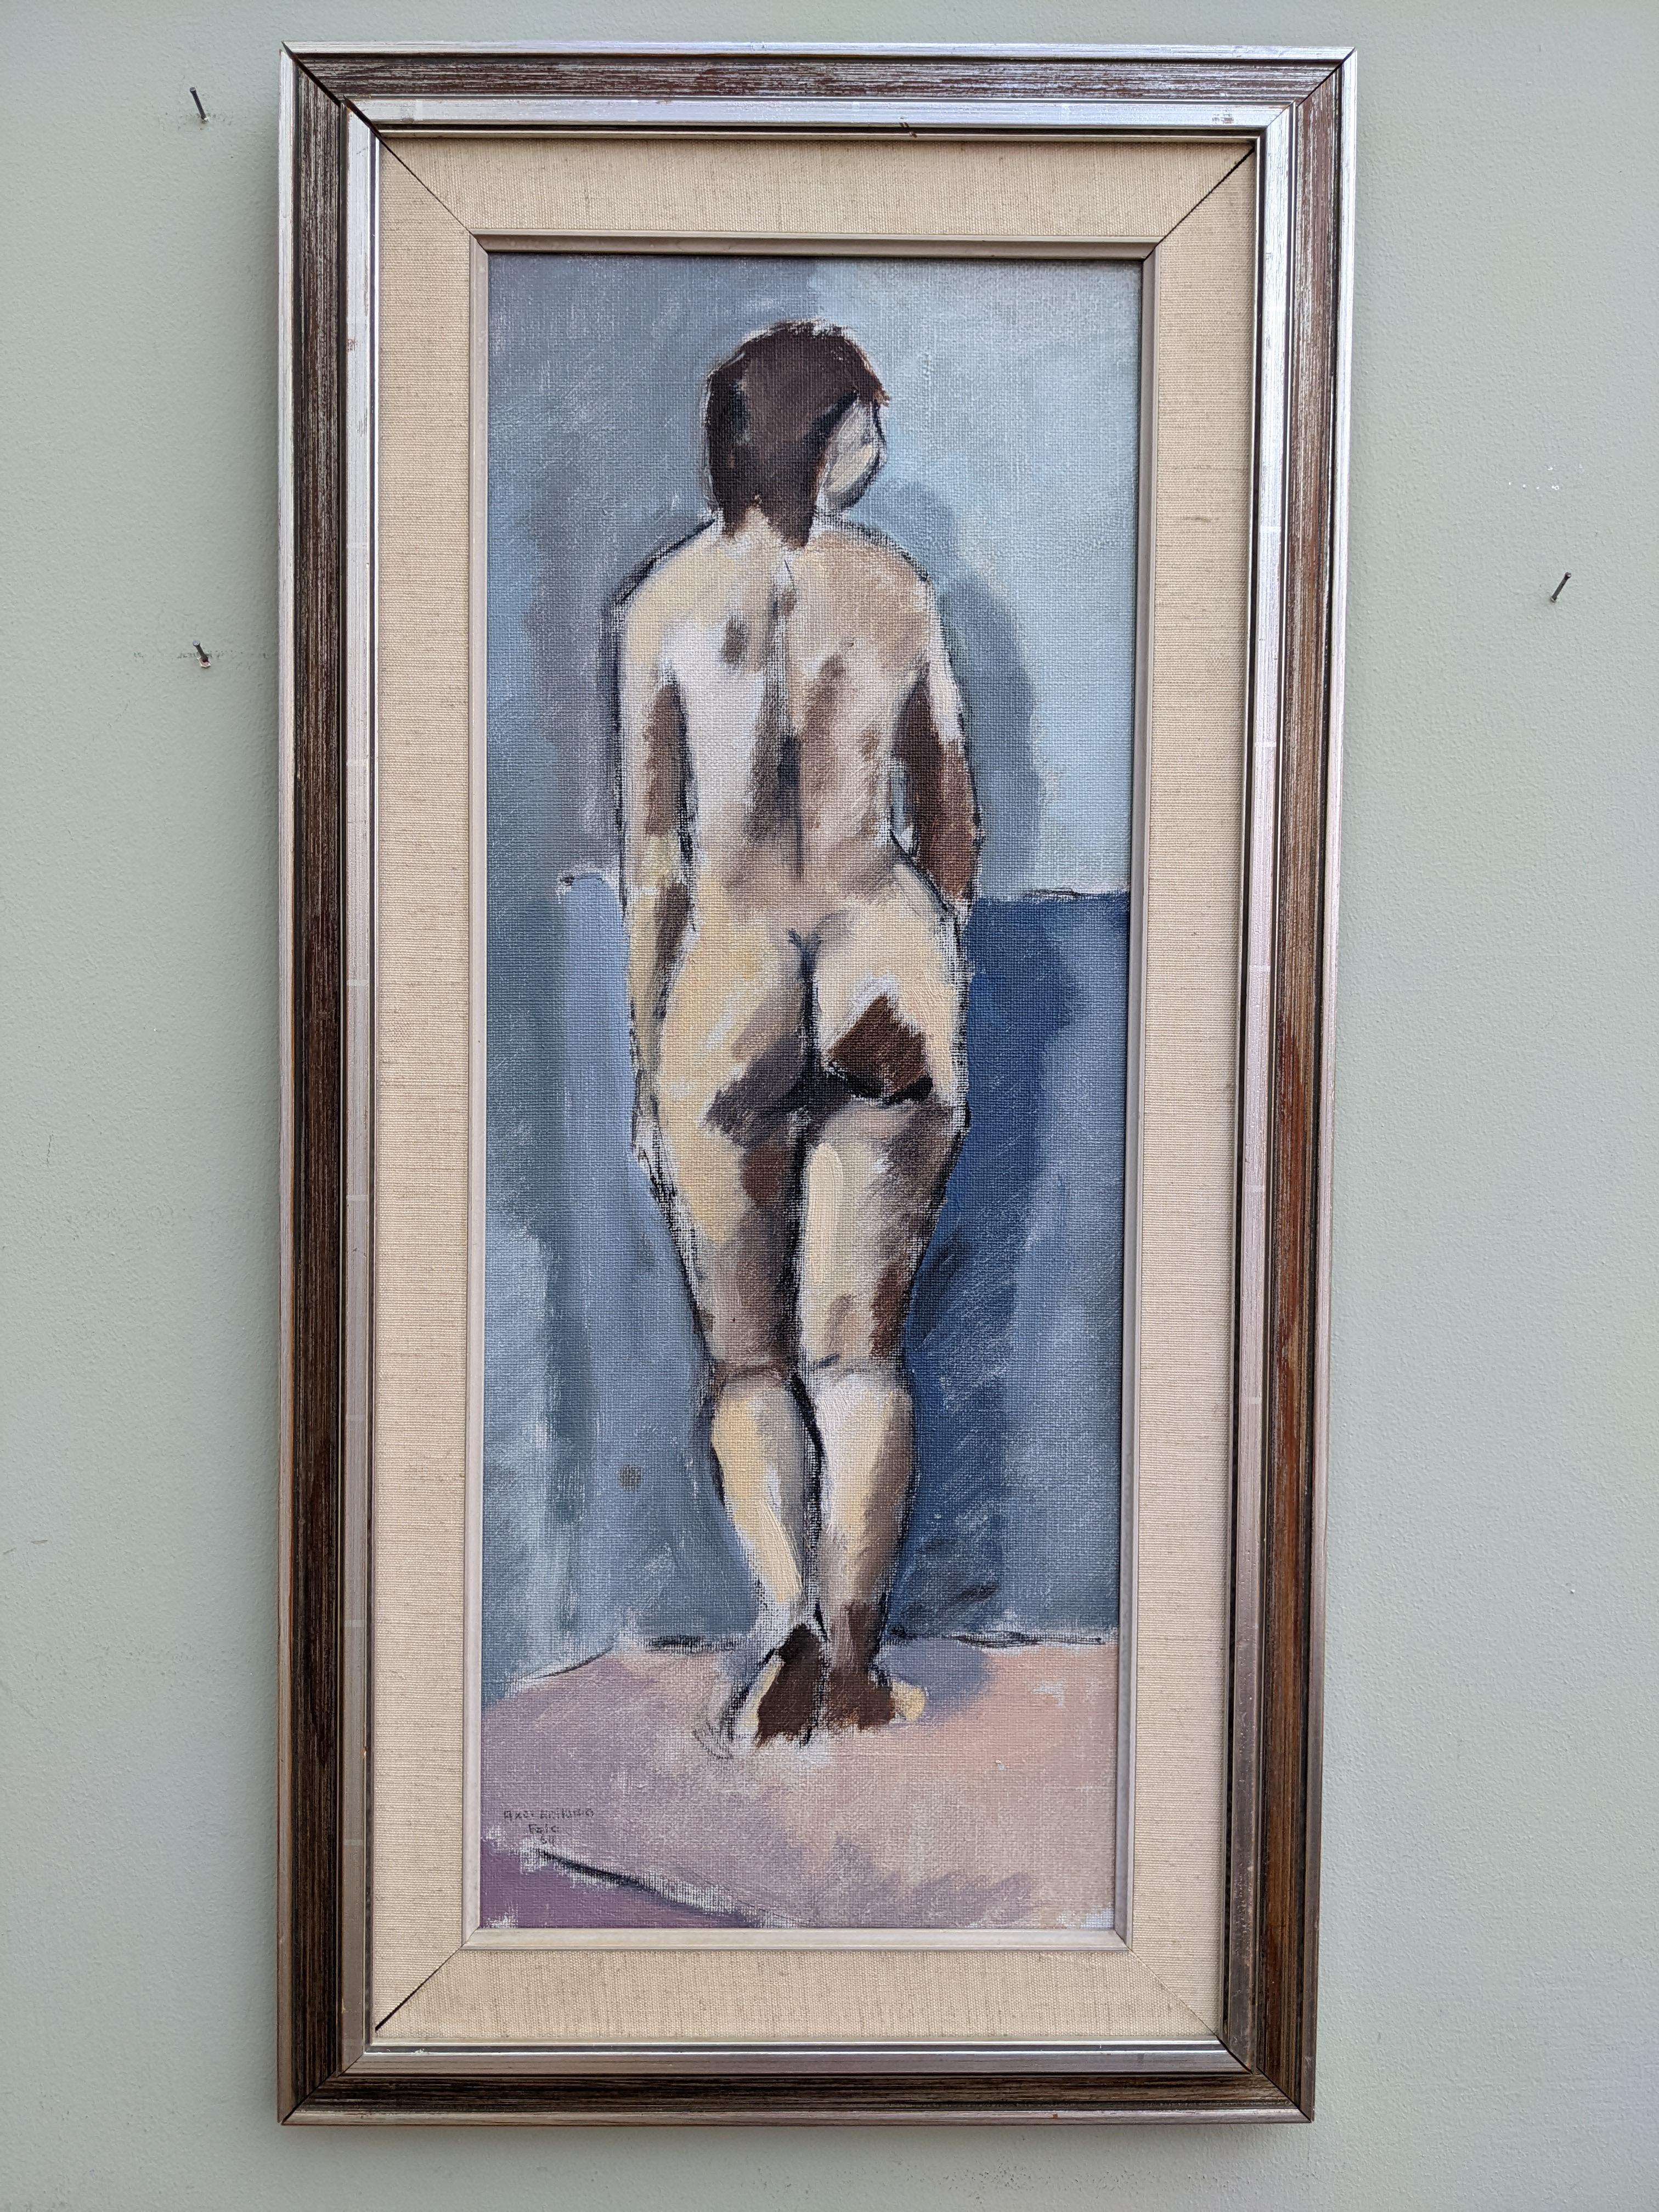 STUDY OF A STANDING NUDE
Size: 74 x 37.5 cm (including frame)
Oil on Canvas

A fantastic modernist style portrait, painted in oil and dated 1964.

A nude figure is depicted standing on a muted pink platform and against a calming blue background.